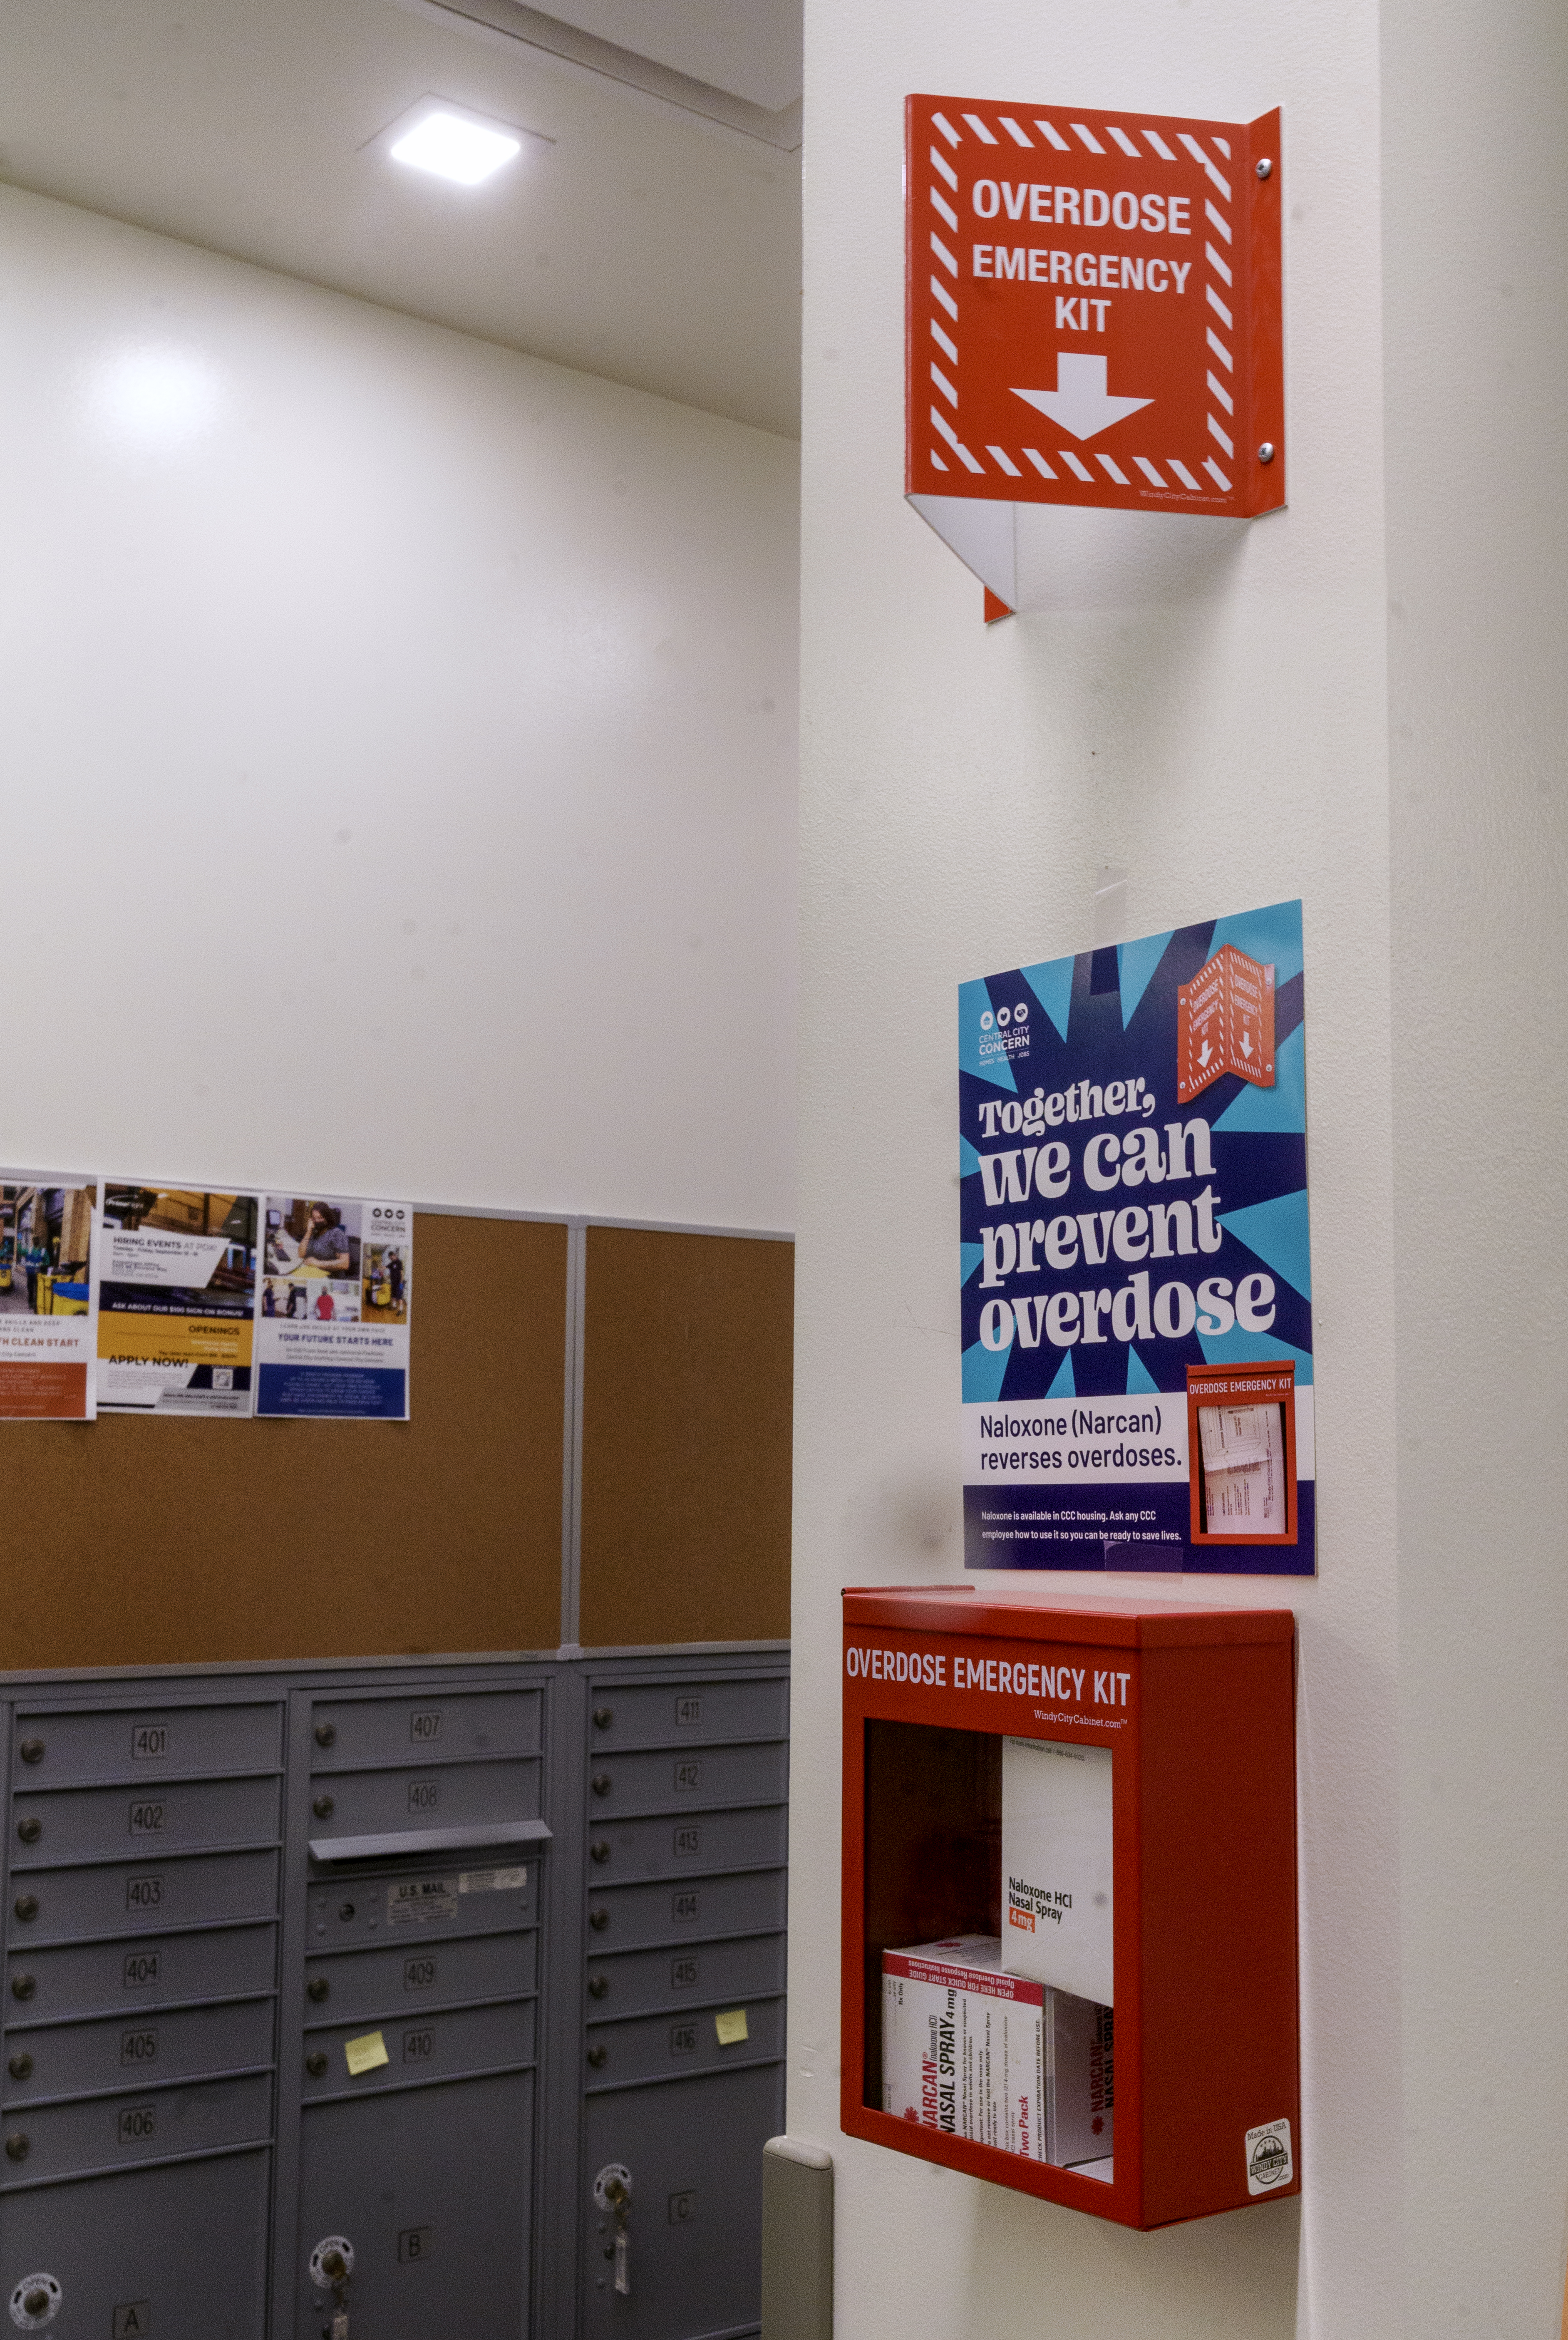 Overdose emergency kits are installed throughout the Blackburn Center in east Portland, May 4, 2023. The 80-bed center, operated by Central City Concern, provides housing for people in recovery, along with health care, employment counseling, addiction treatment and other support services.